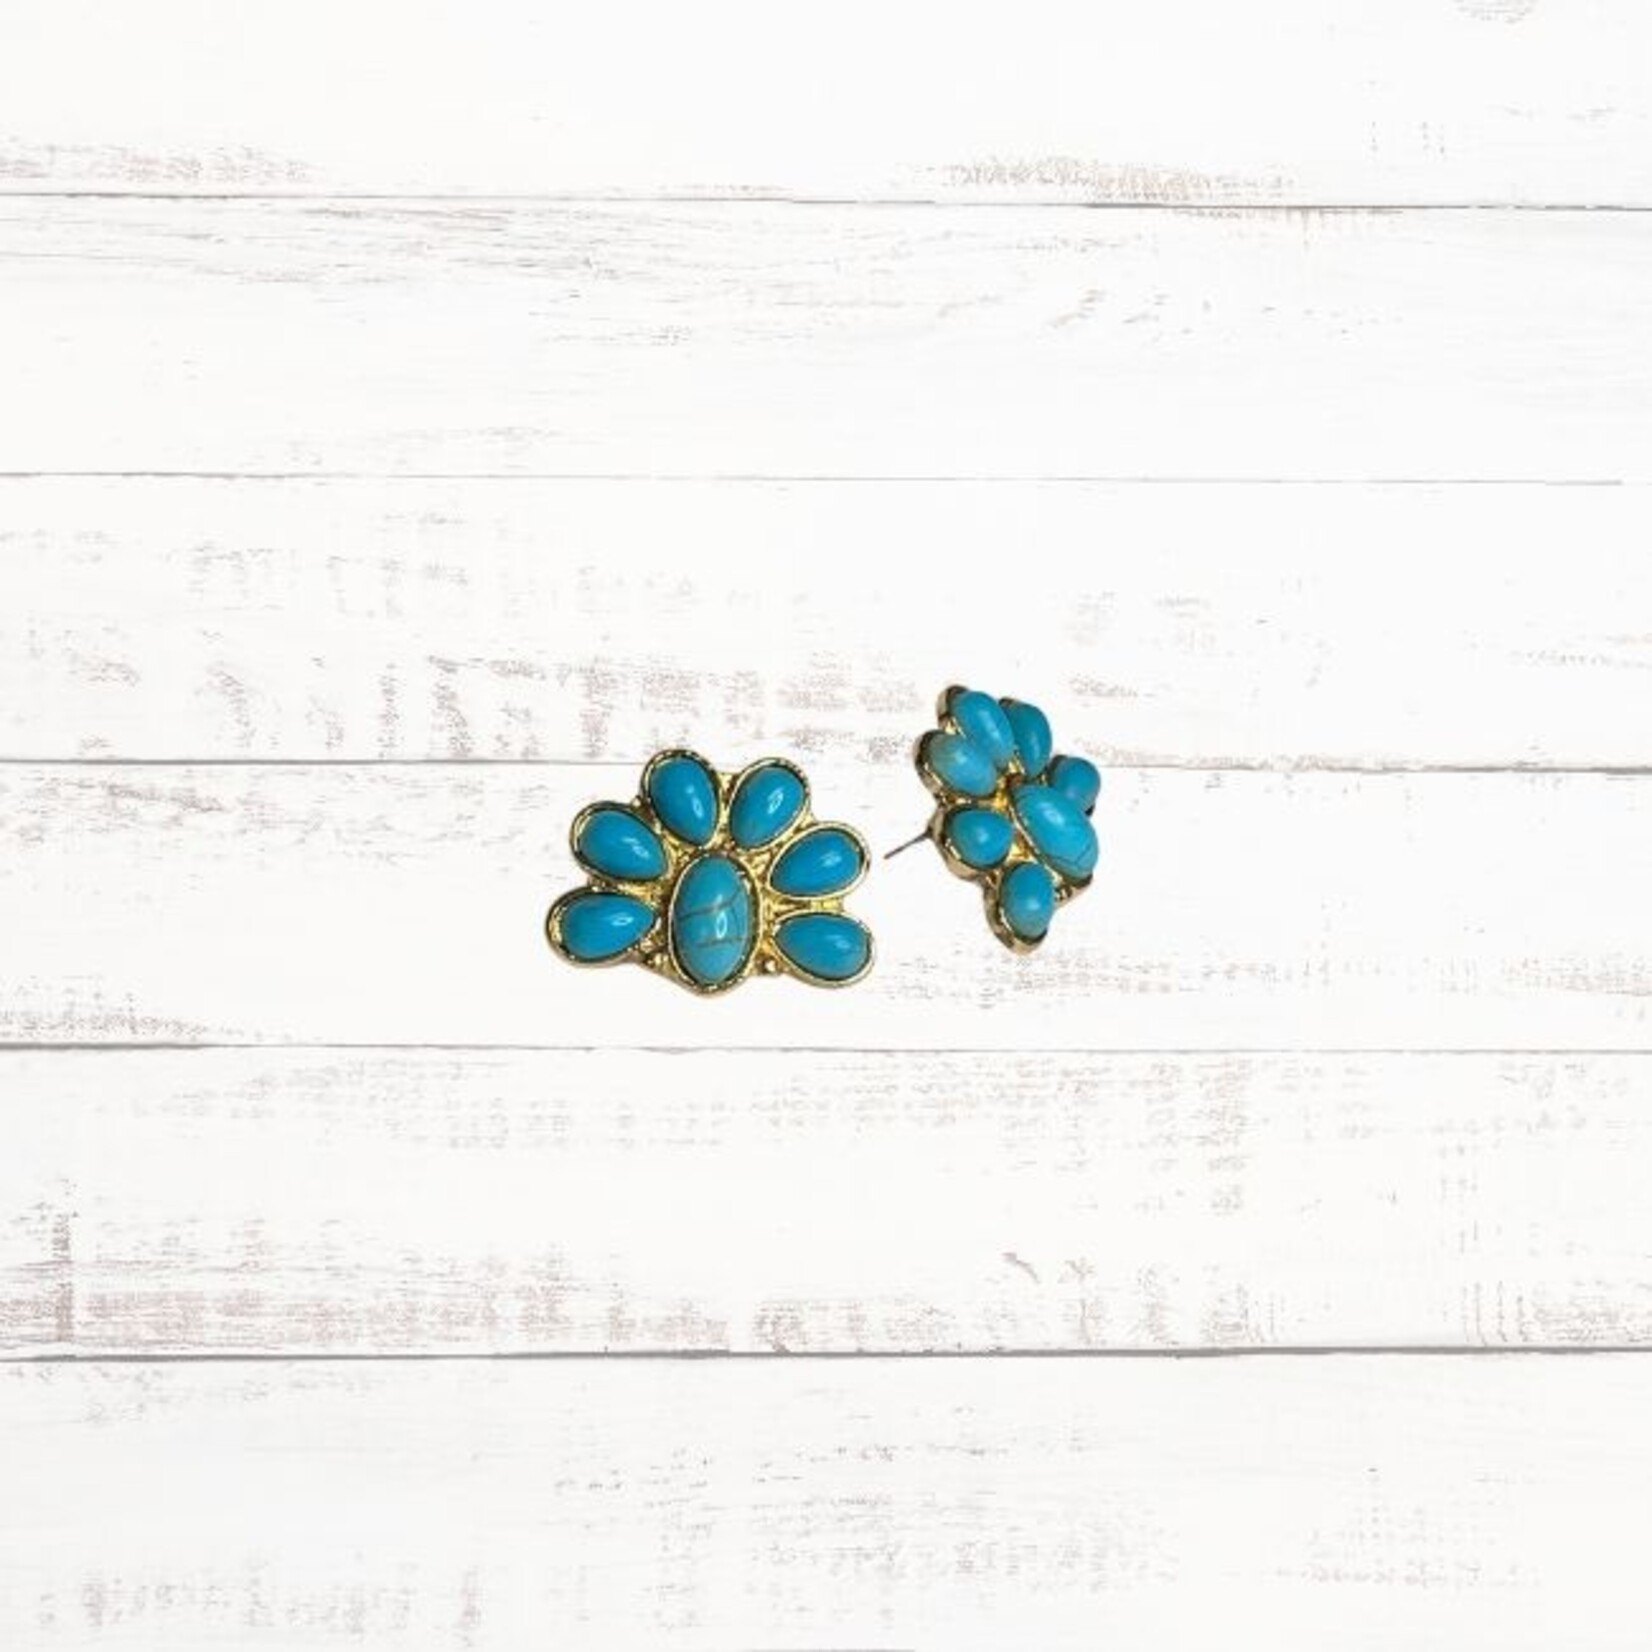 West & Co Gold & Turquoise Half Blossom